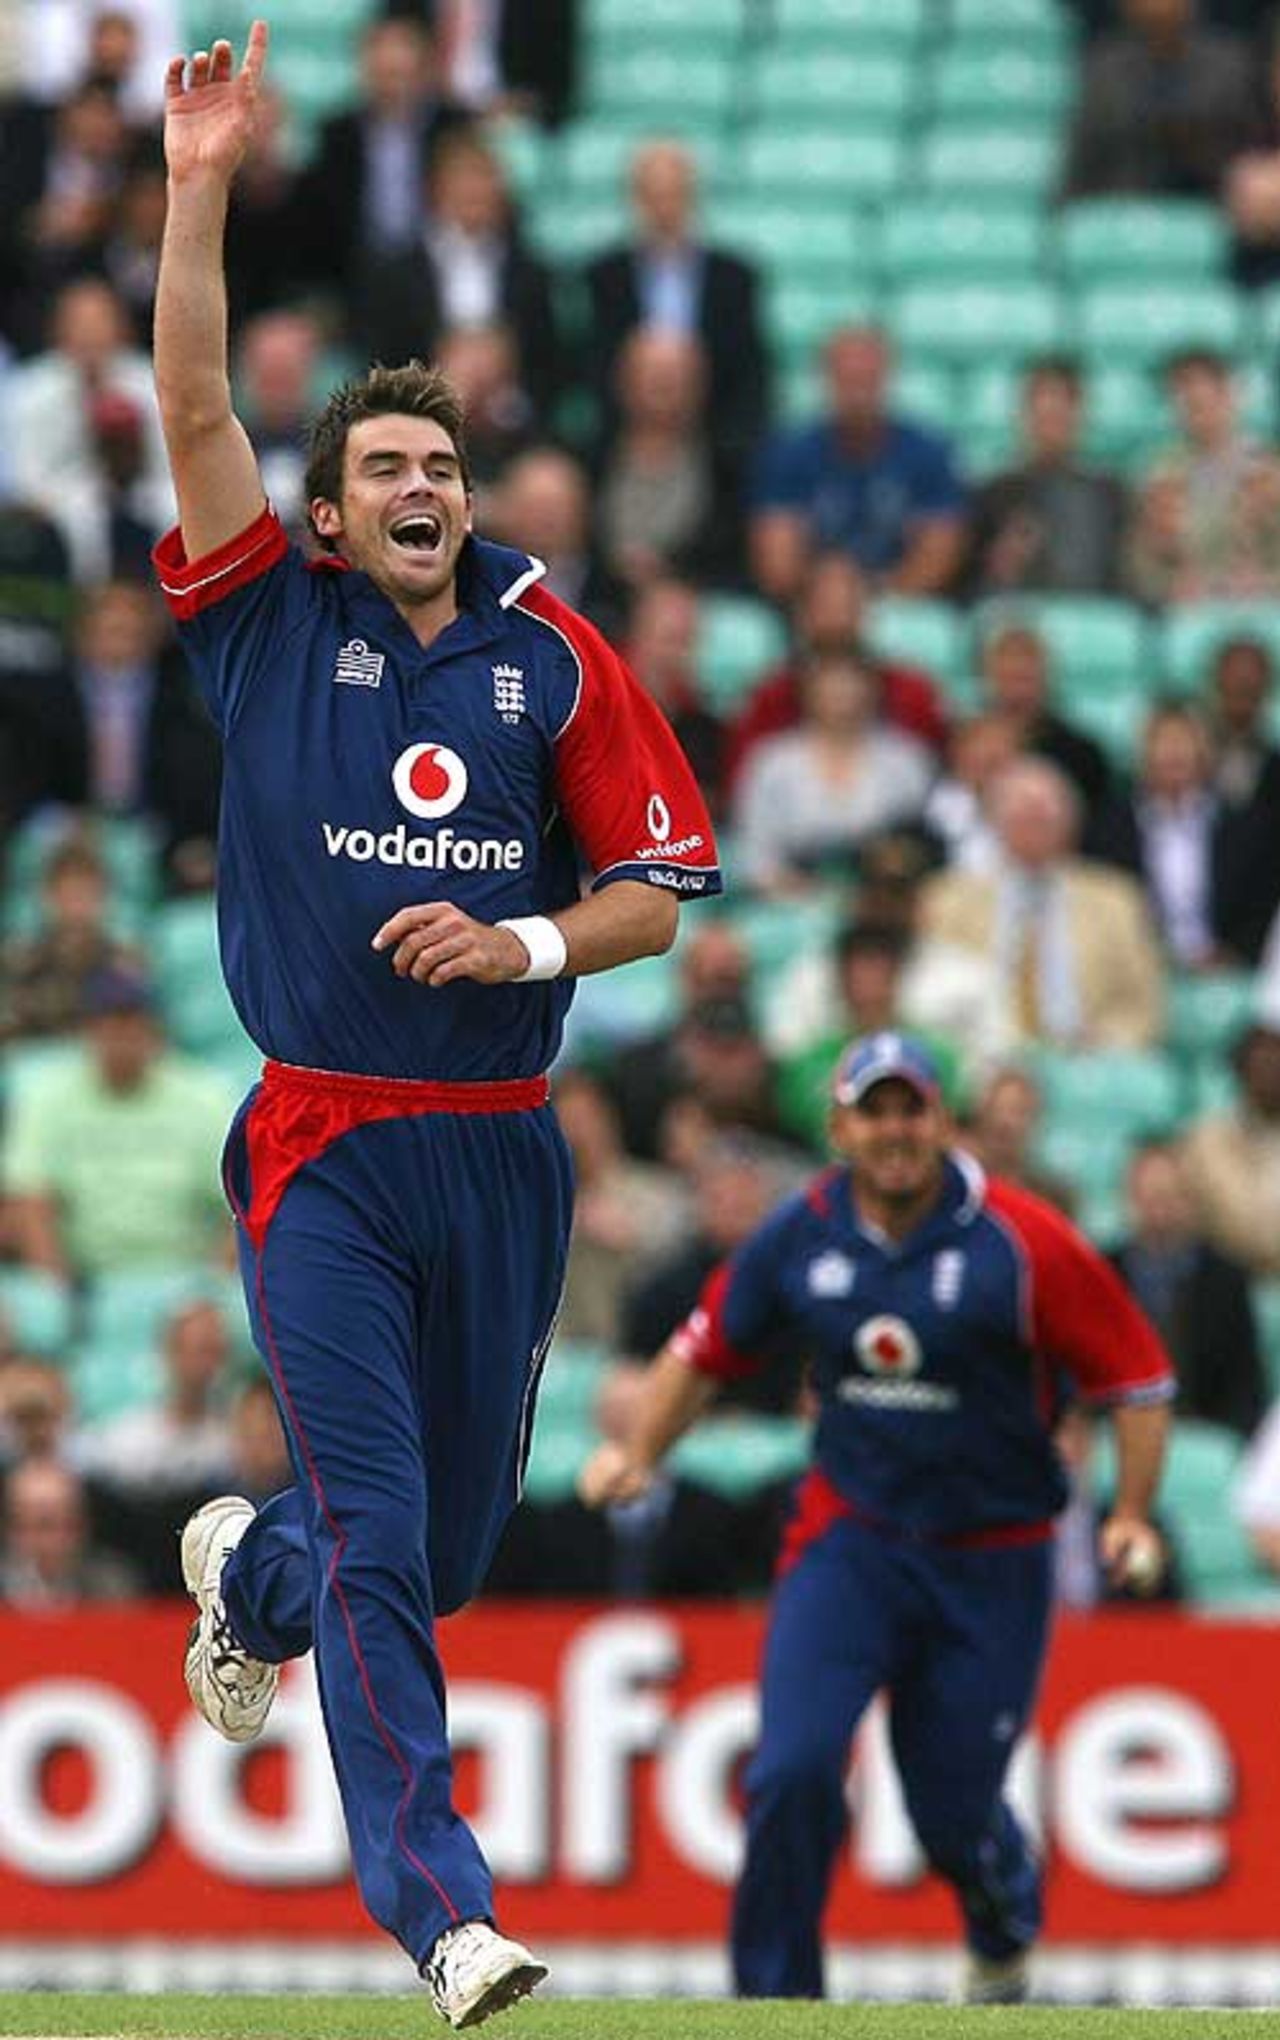 James Anderson celebrates the wicket of Chris Gayle, England v West Indies, Twenty20, The Oval, June 28, 2007